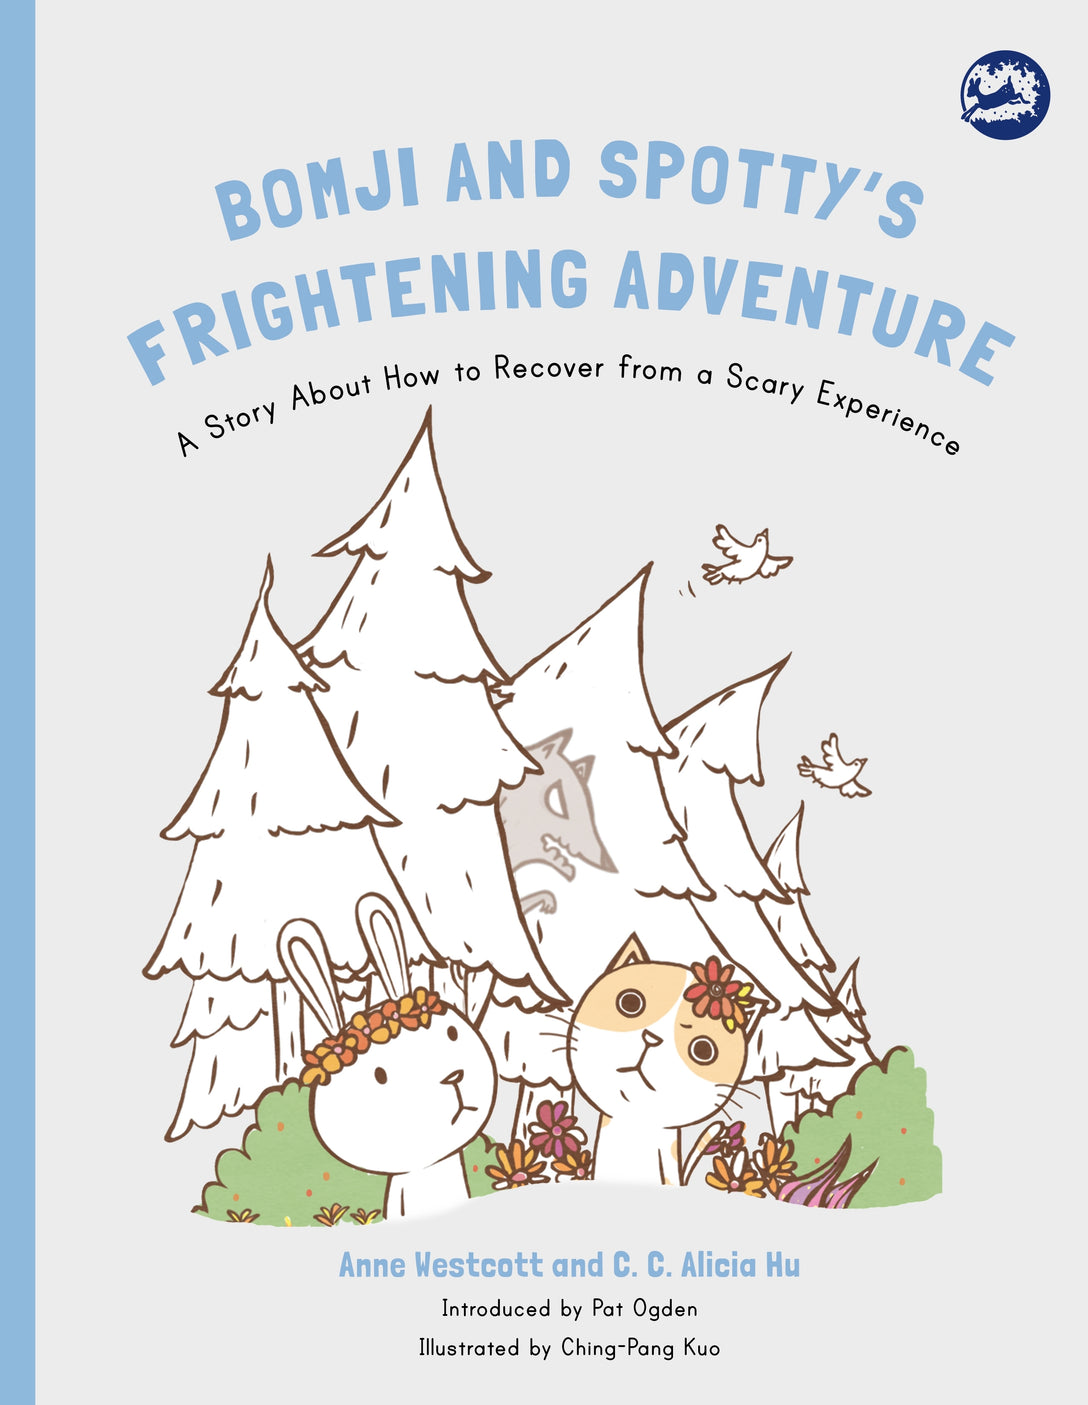 Bomji and Spotty's Frightening Adventure by Anne Westcott, C. C. Alicia Hu, Ching-Pang Kuo